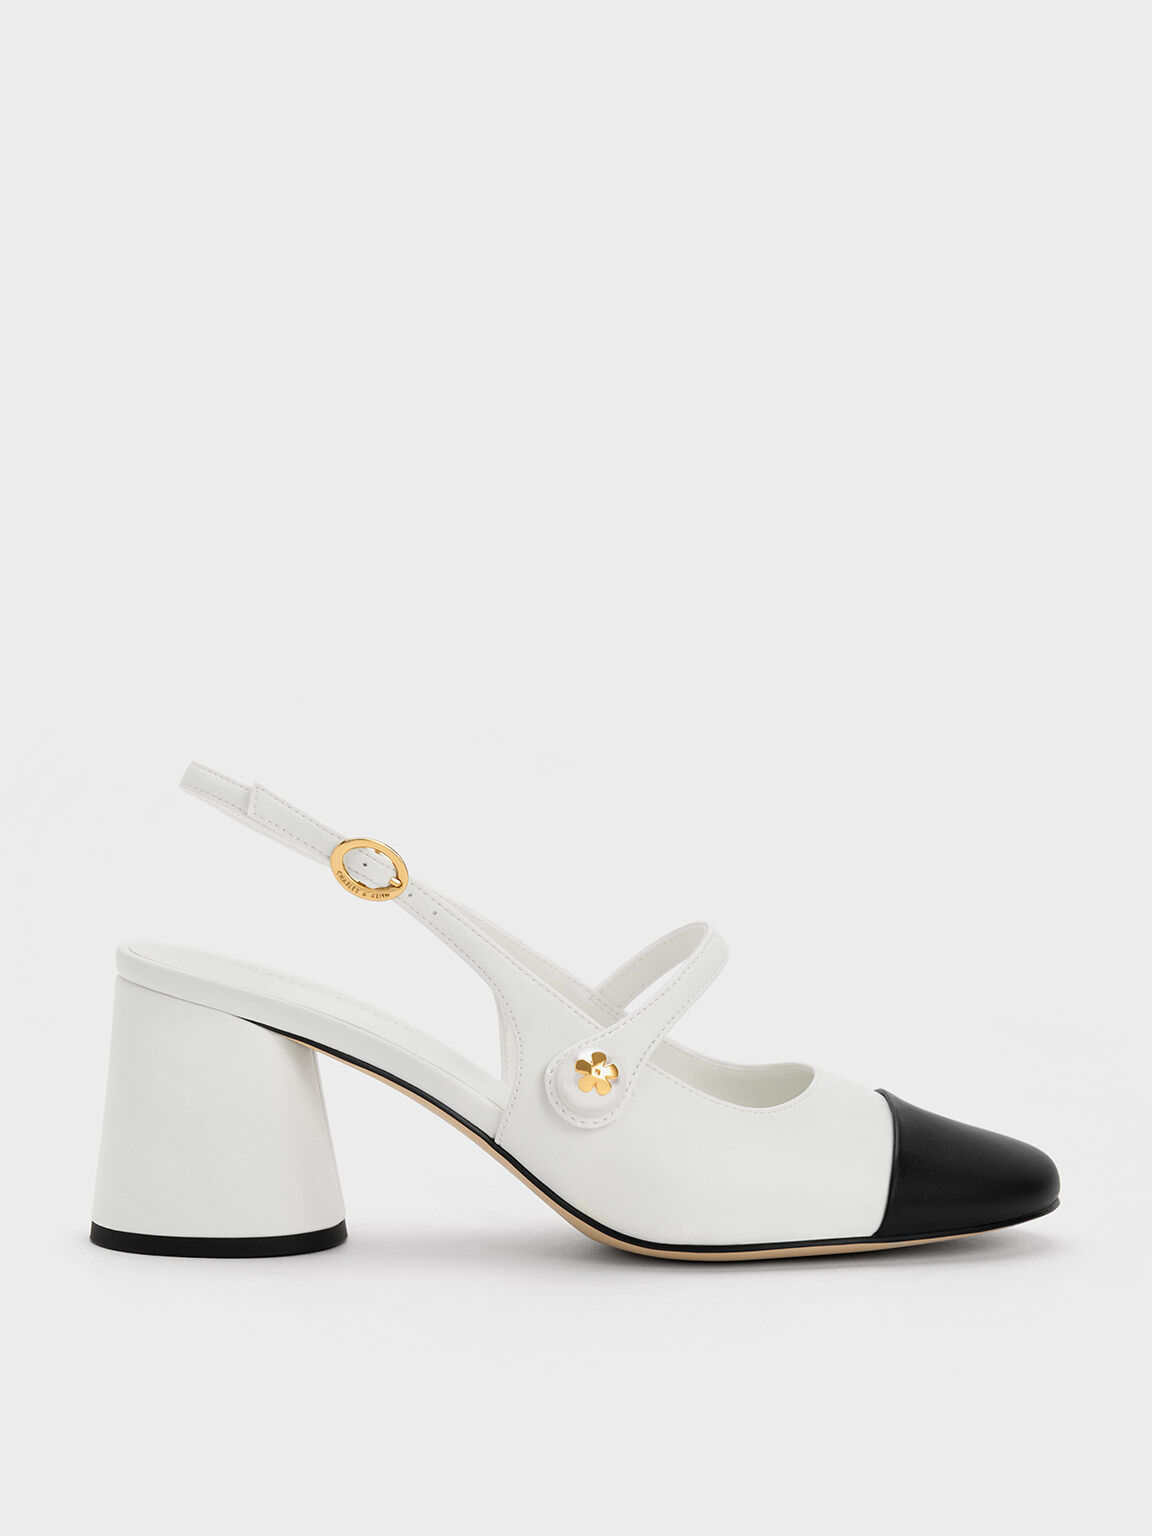 Charles & Keith Charles & Keith Multicoloured Bow Checkered Slingback Pumps  | CHARLES & KEITH 53.00